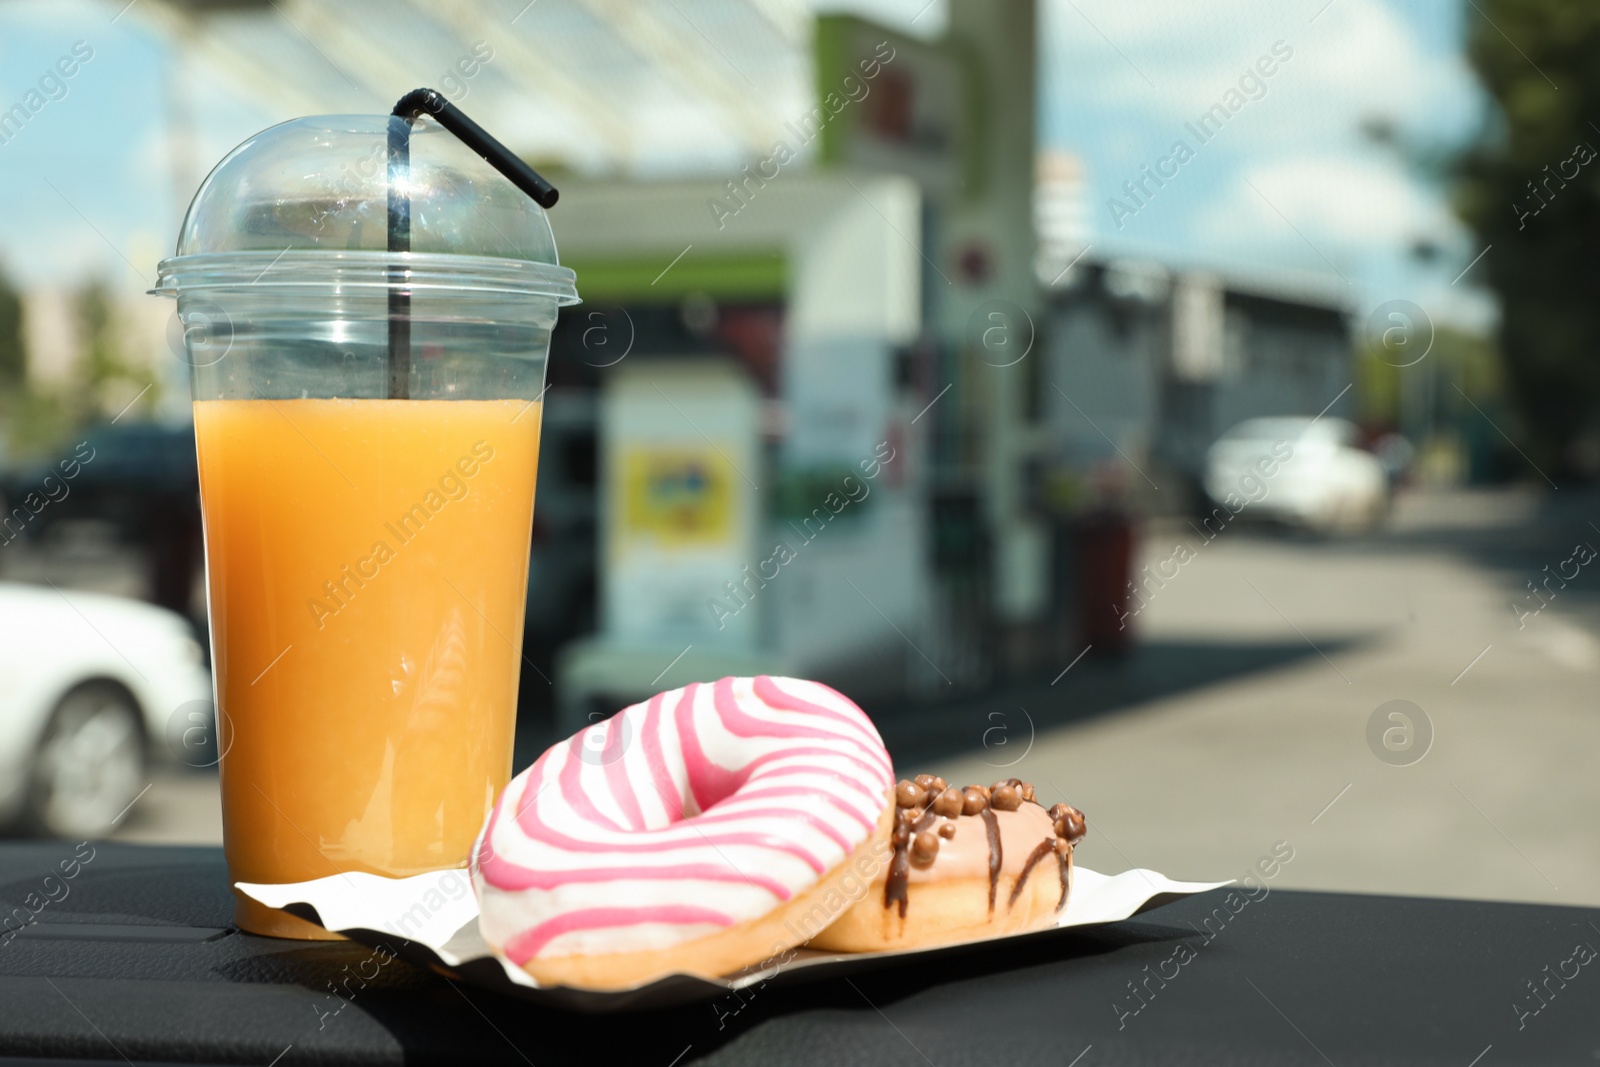 Photo of Plastic cup of juice and doughnuts on car dashboard at gas station. Space for text